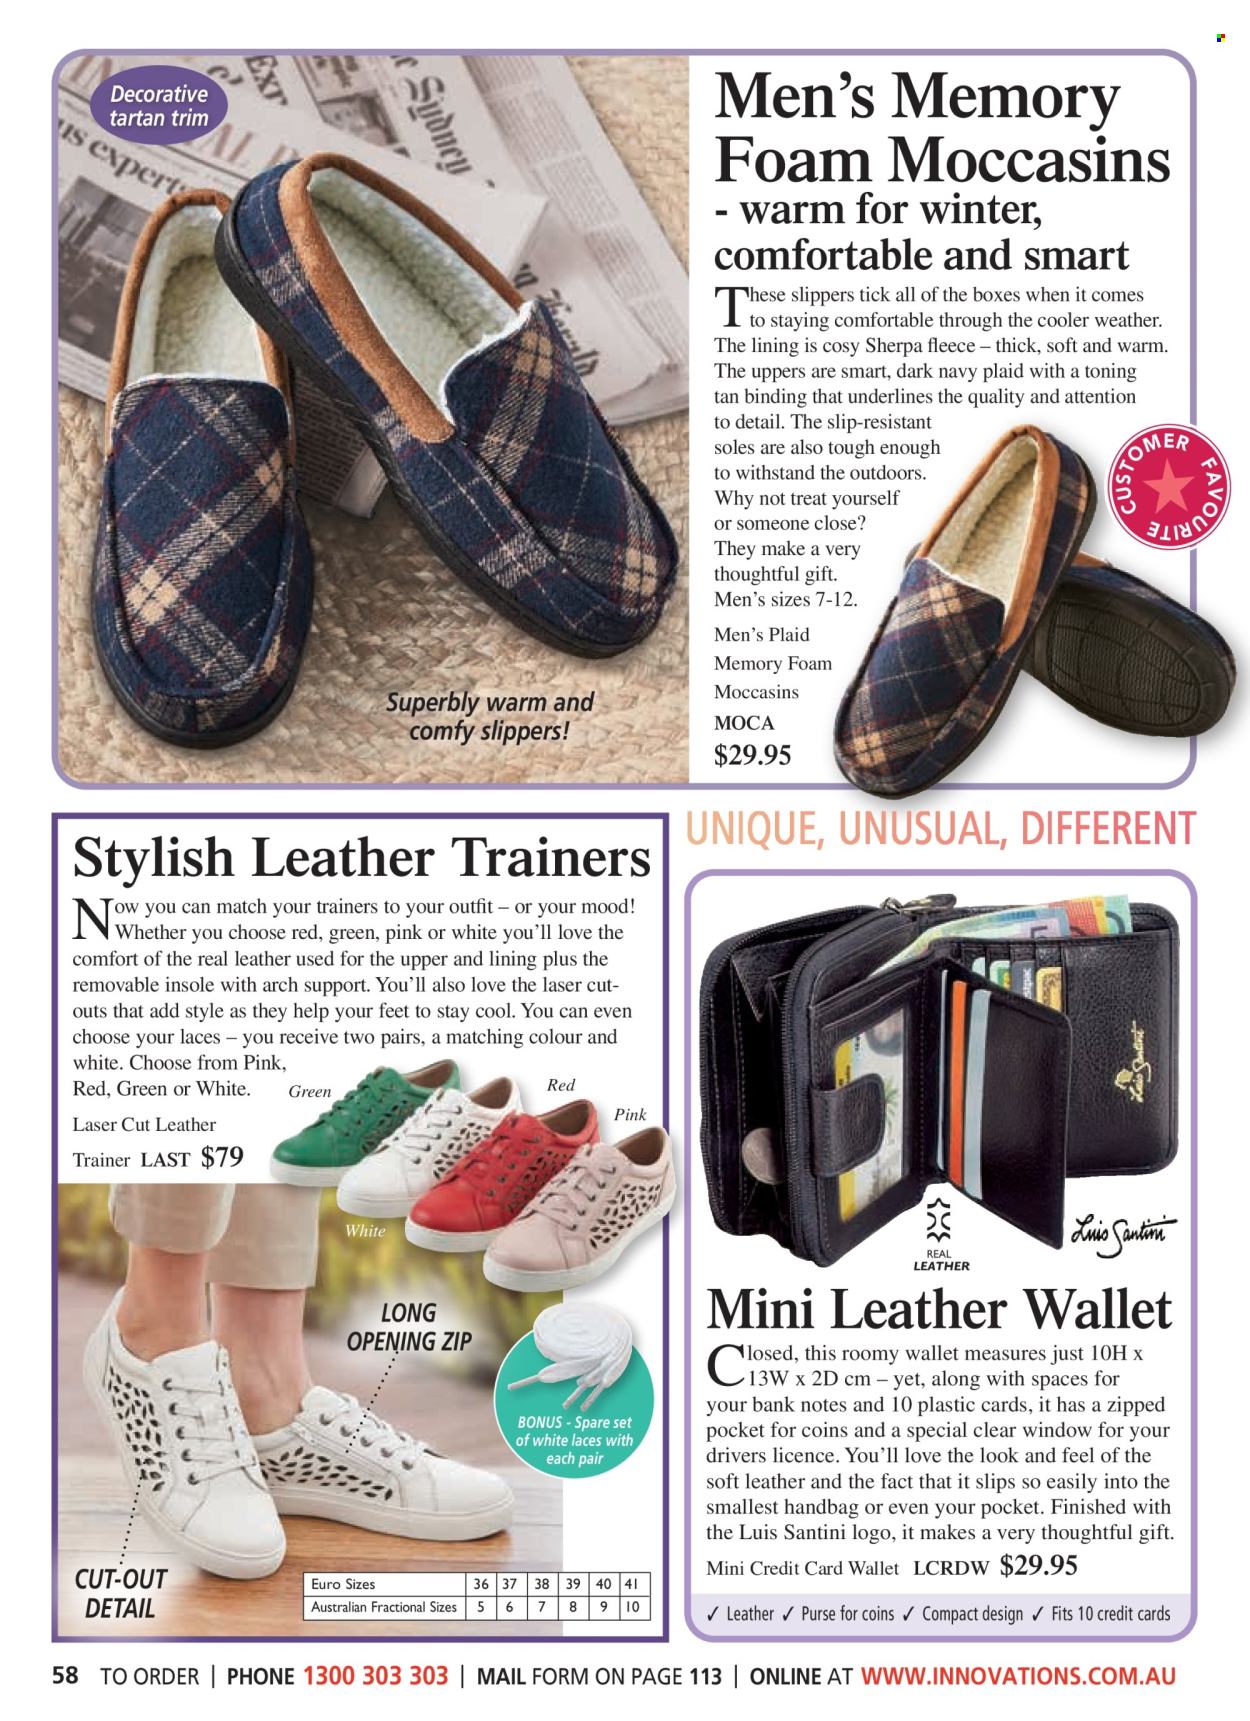 thumbnail - Innovations Catalogue - Sales products - slippers, trainers, sherpa, handbag, leather wallet, laser. Page 58.